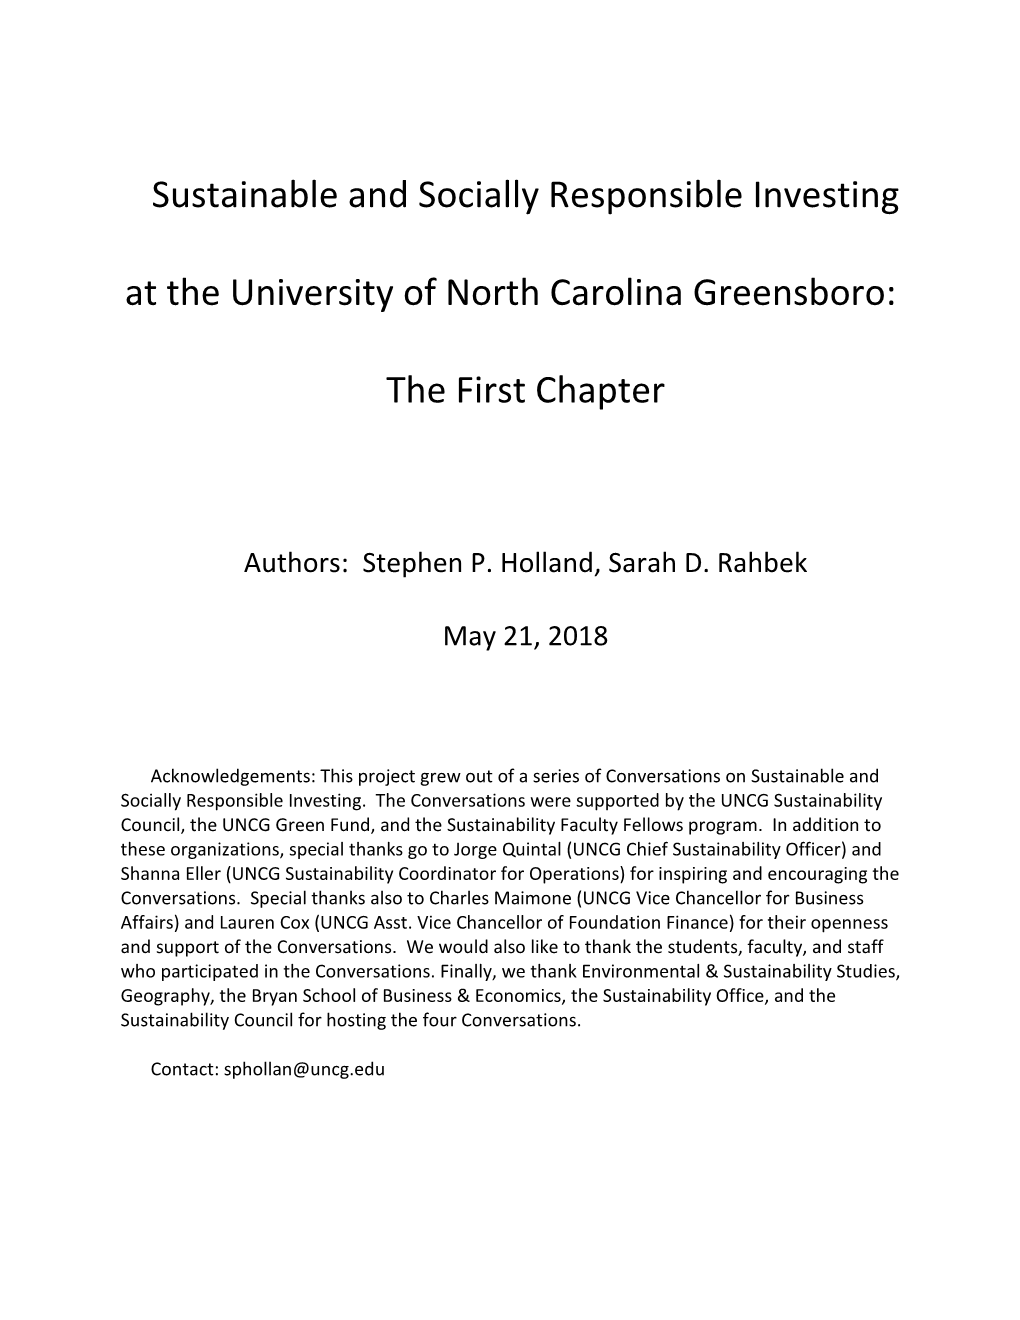 Sustainable and Socially Responsible Investing At